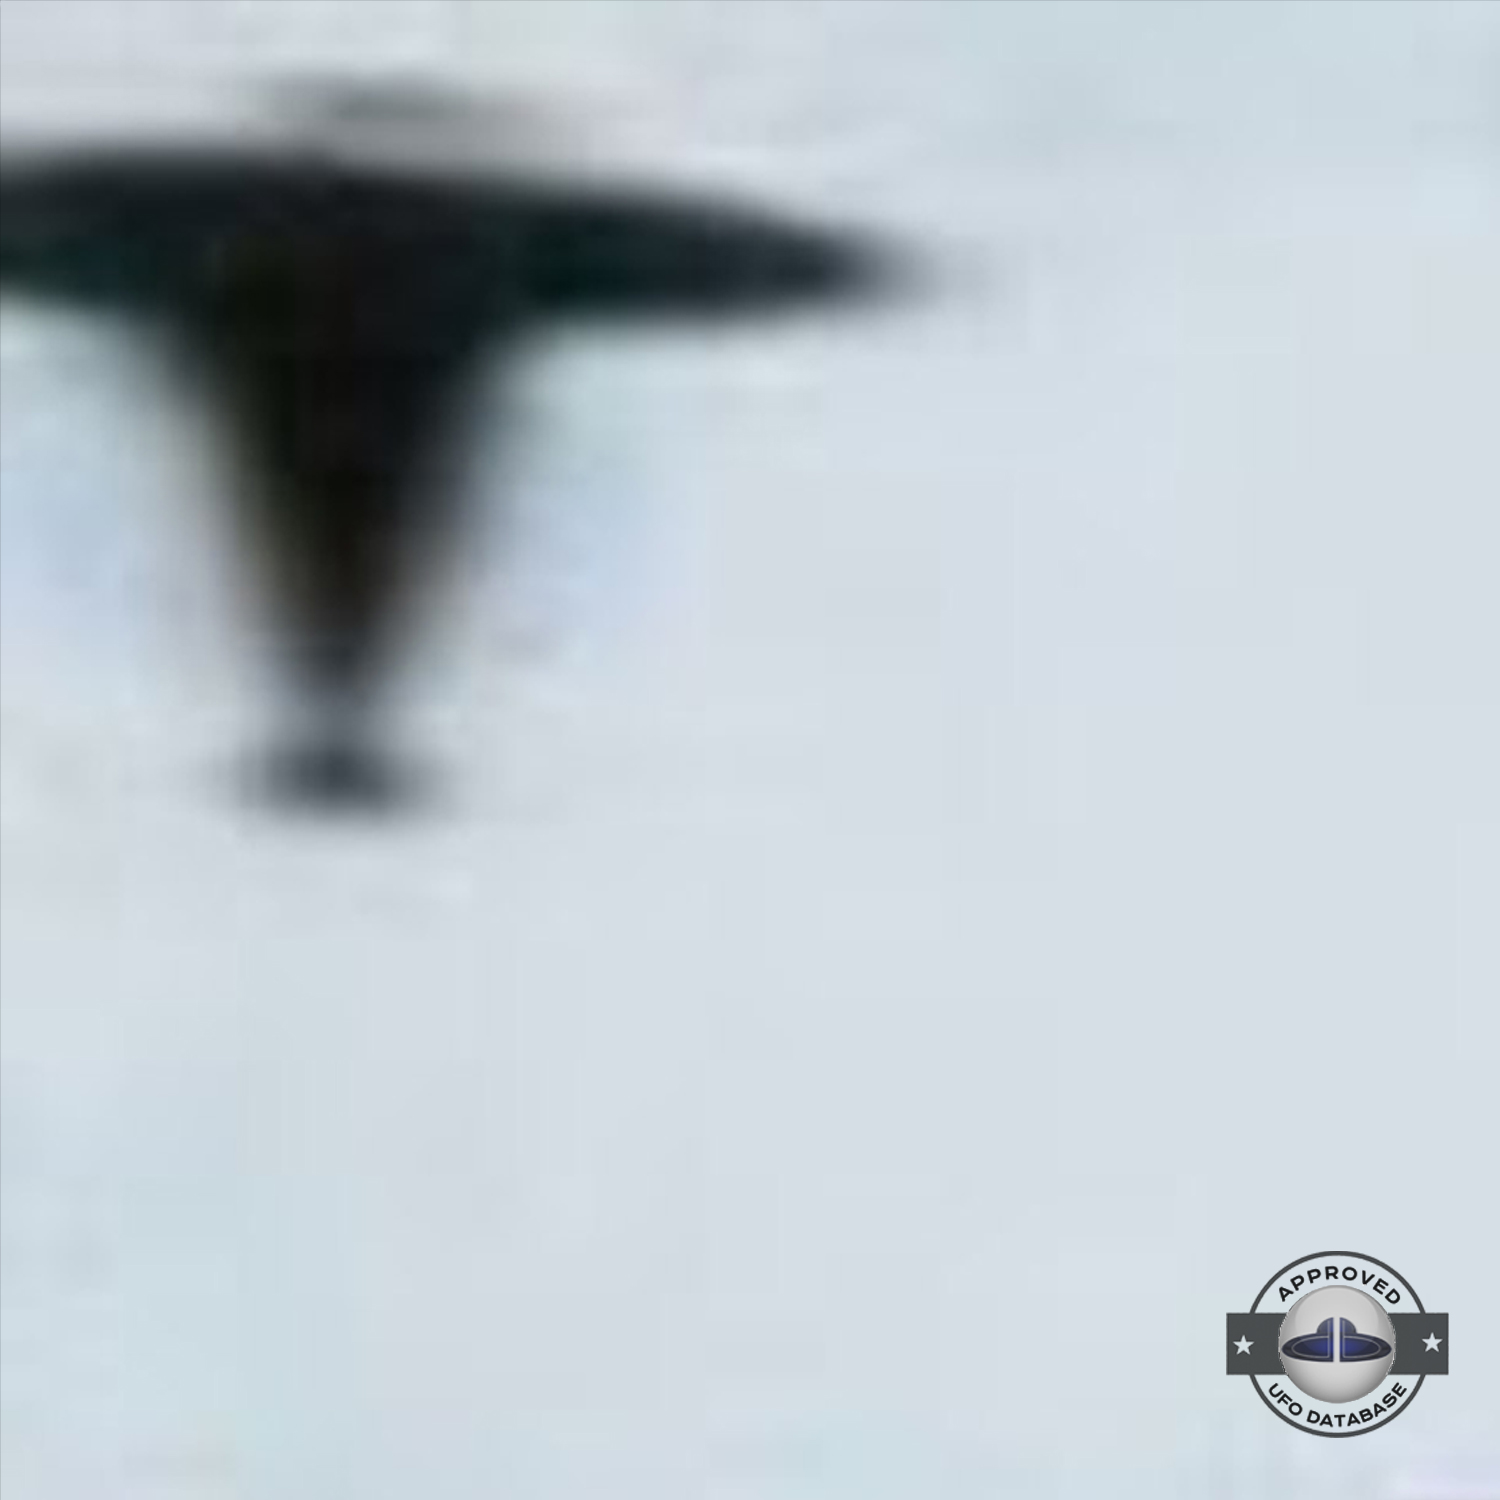 UFO picture taken from moving Train | Oberwesel, Germany | March 1964 UFO Picture #178-4